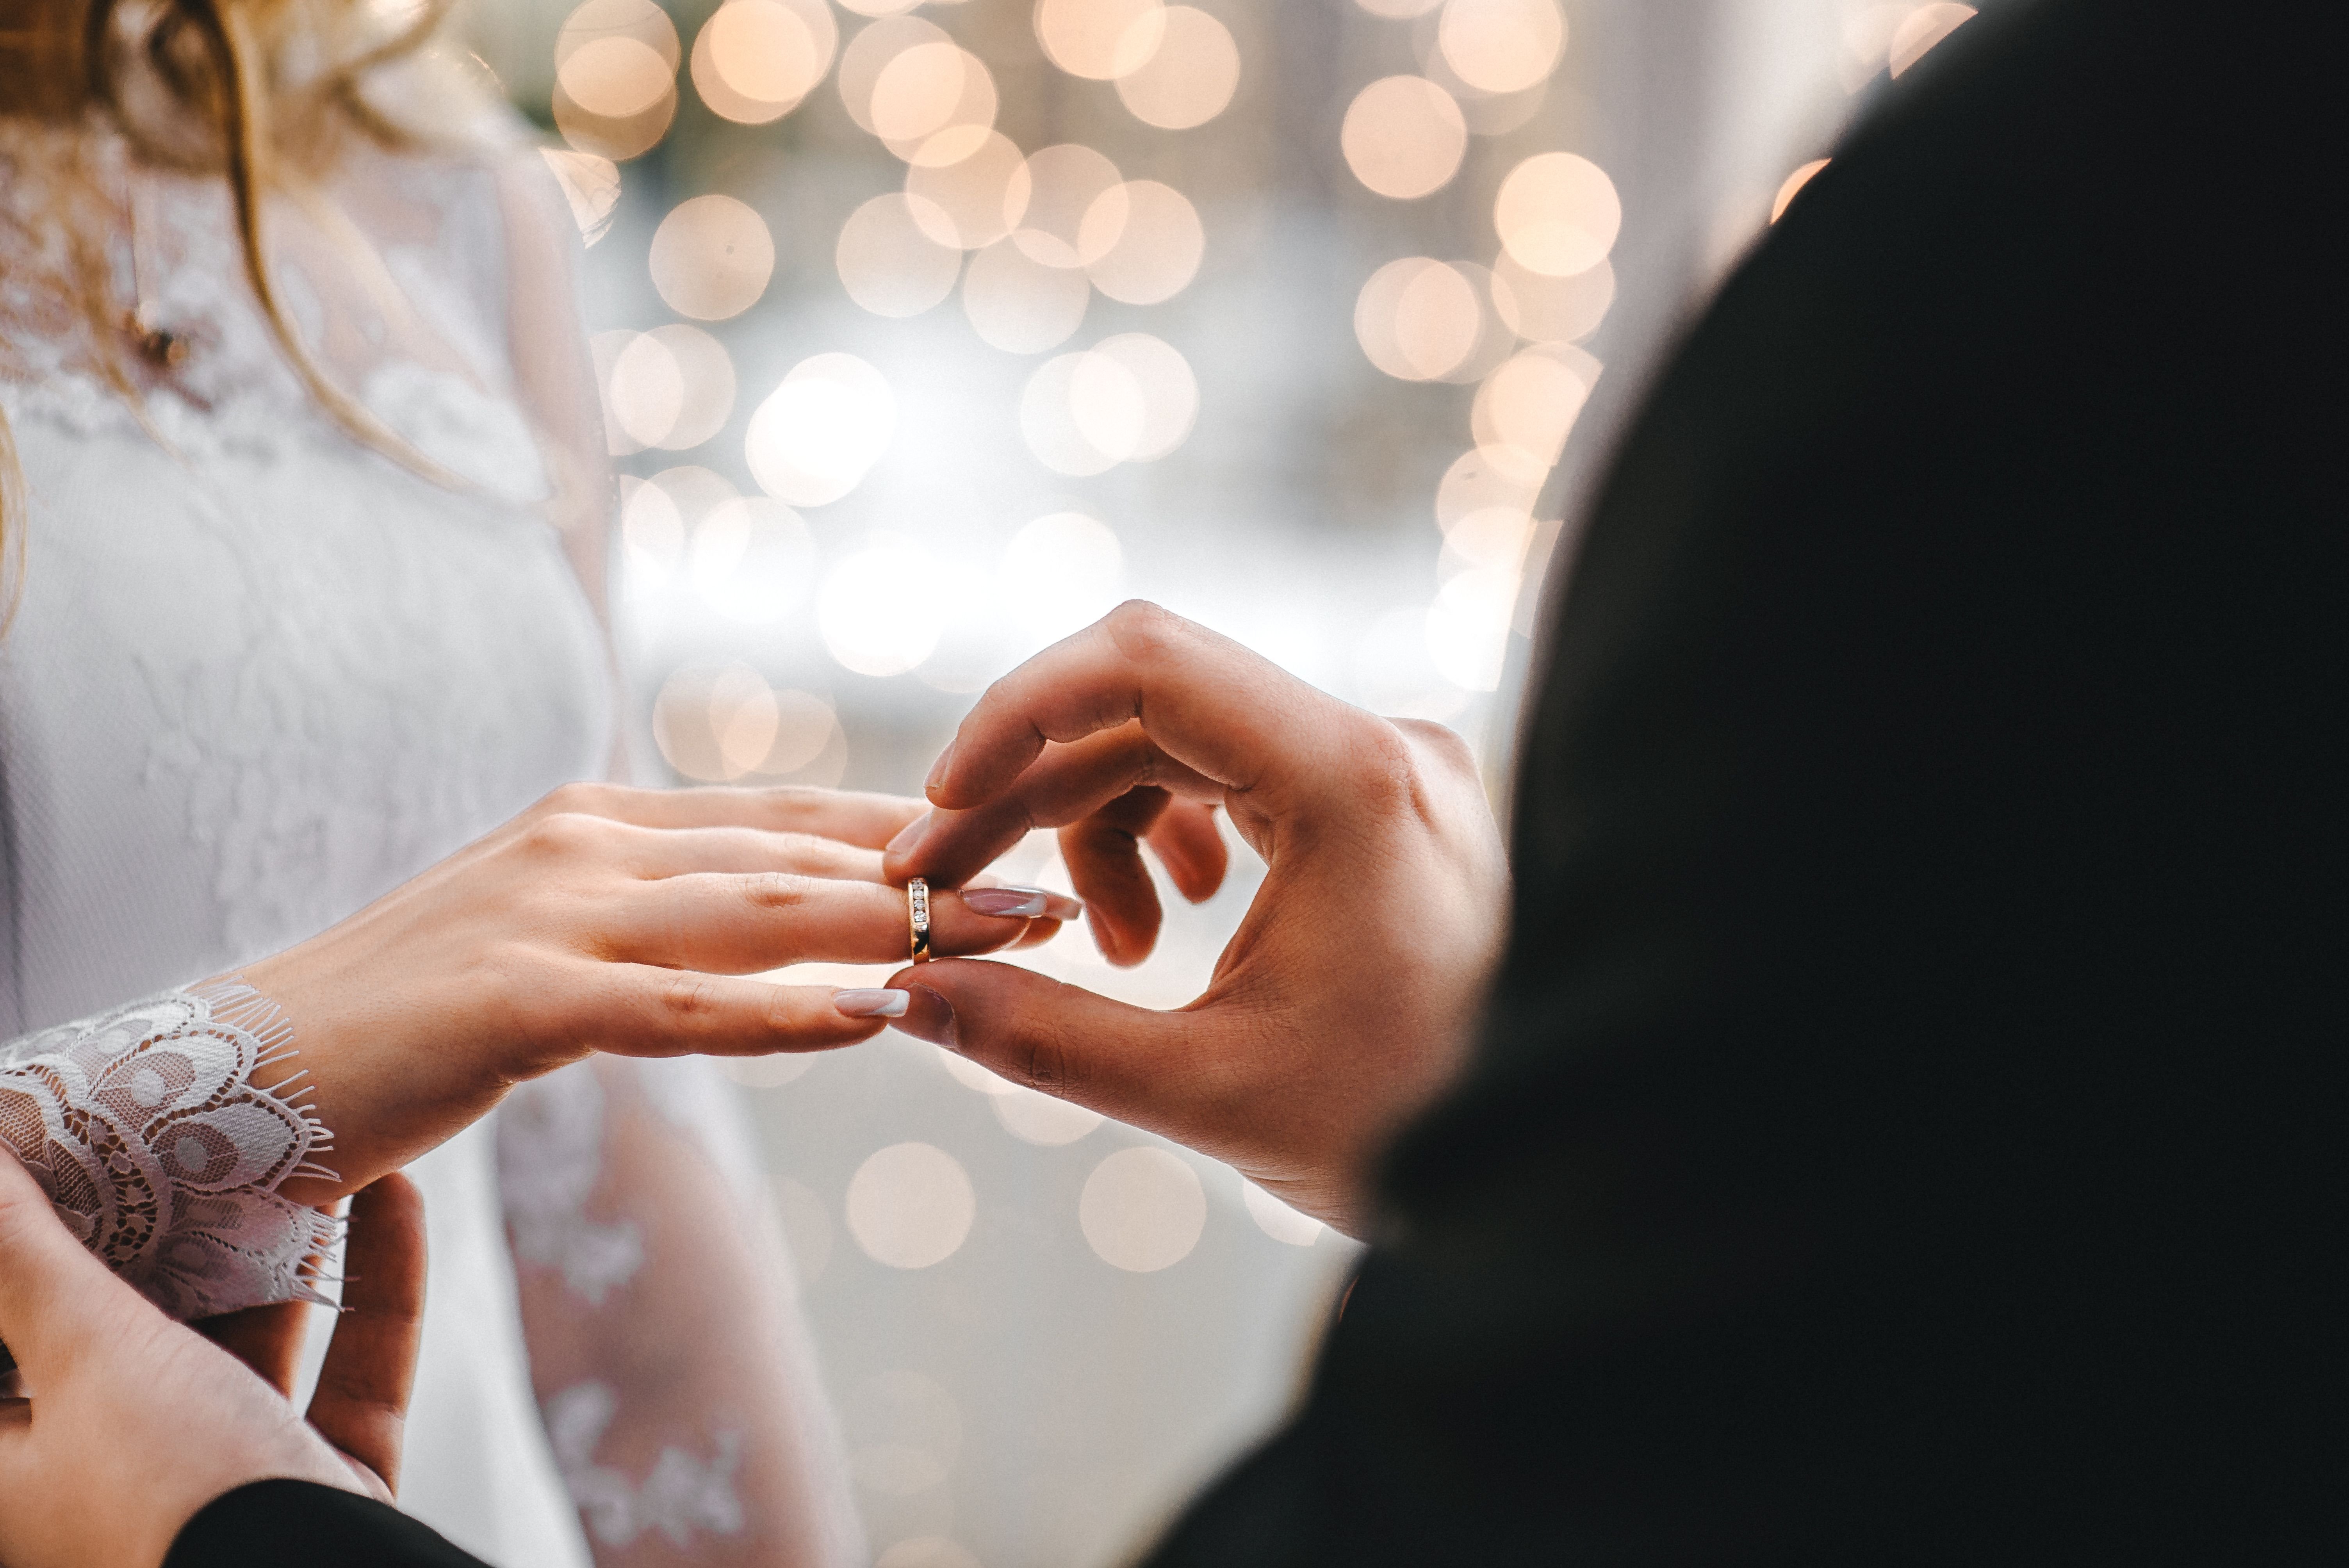 The groom places the wedding ring on the bride's finger. | Source: Shutterstock